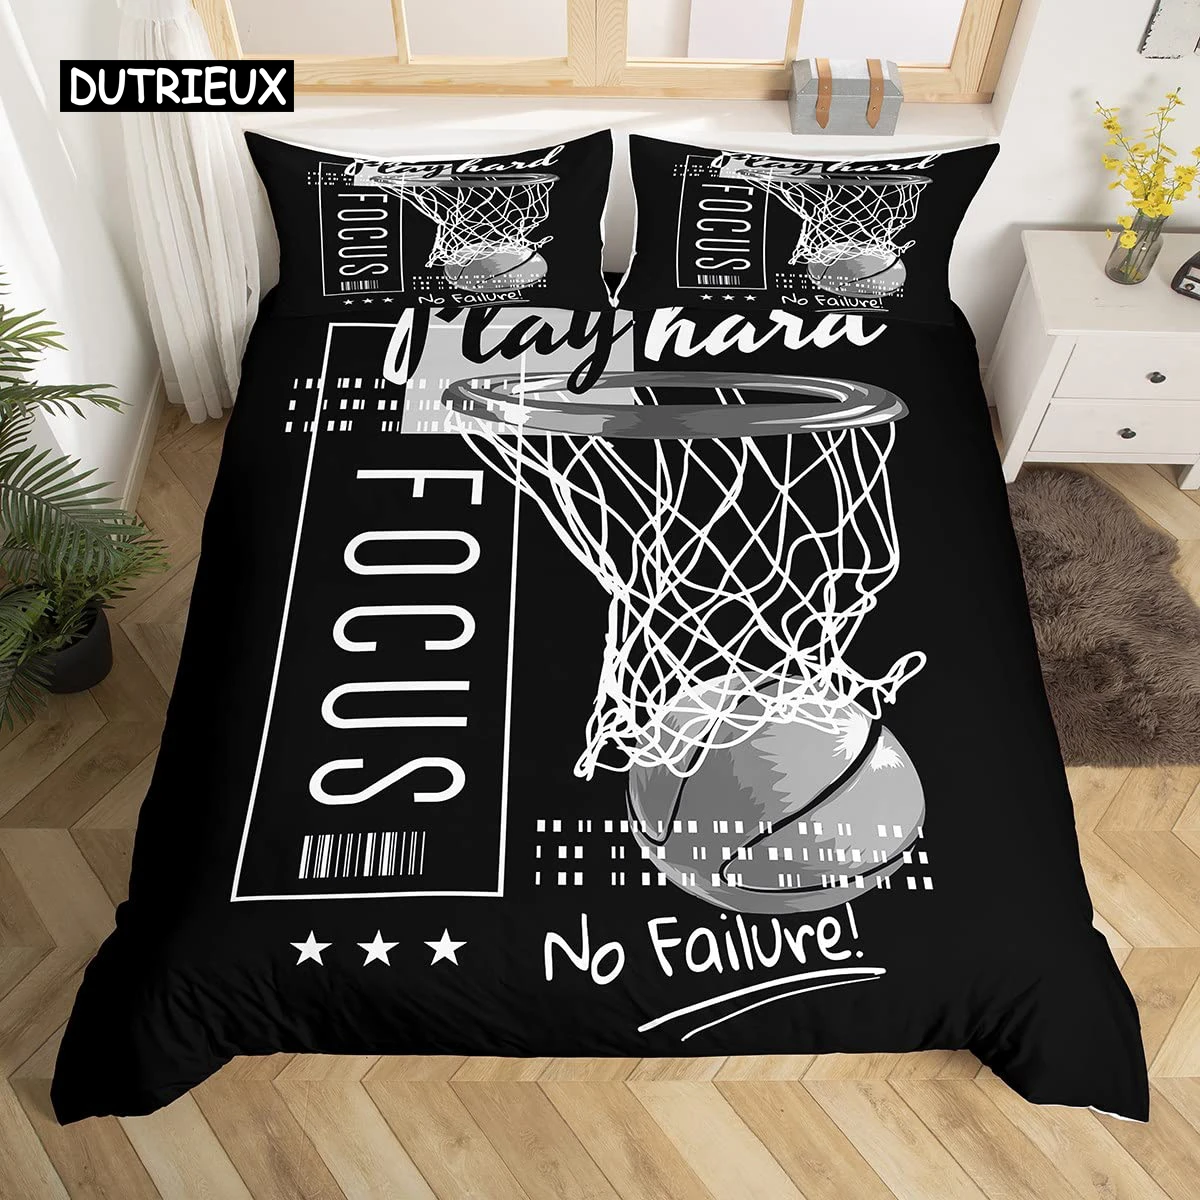 

Basketball Duvet Cover Set Sports Theme Bedding Set For Boys Teens Men With Motivated No Failure Pattern Soft Comforter Cover